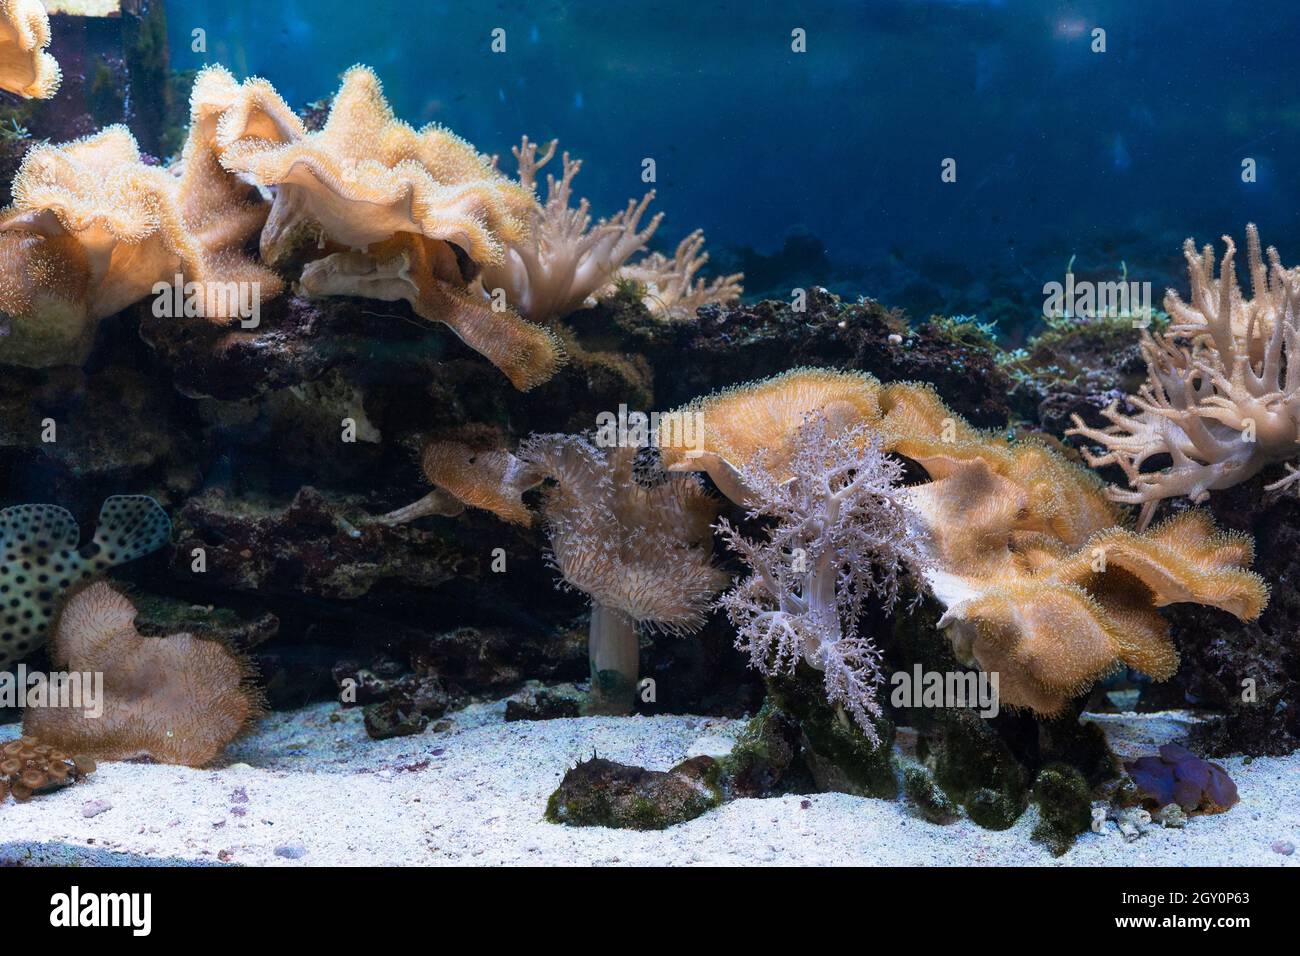 An underwater photo of a colony of mushroom corals Fungiidae on a reef in an aquarium. Colorful corals growing on the ocean floor. Stock Photo